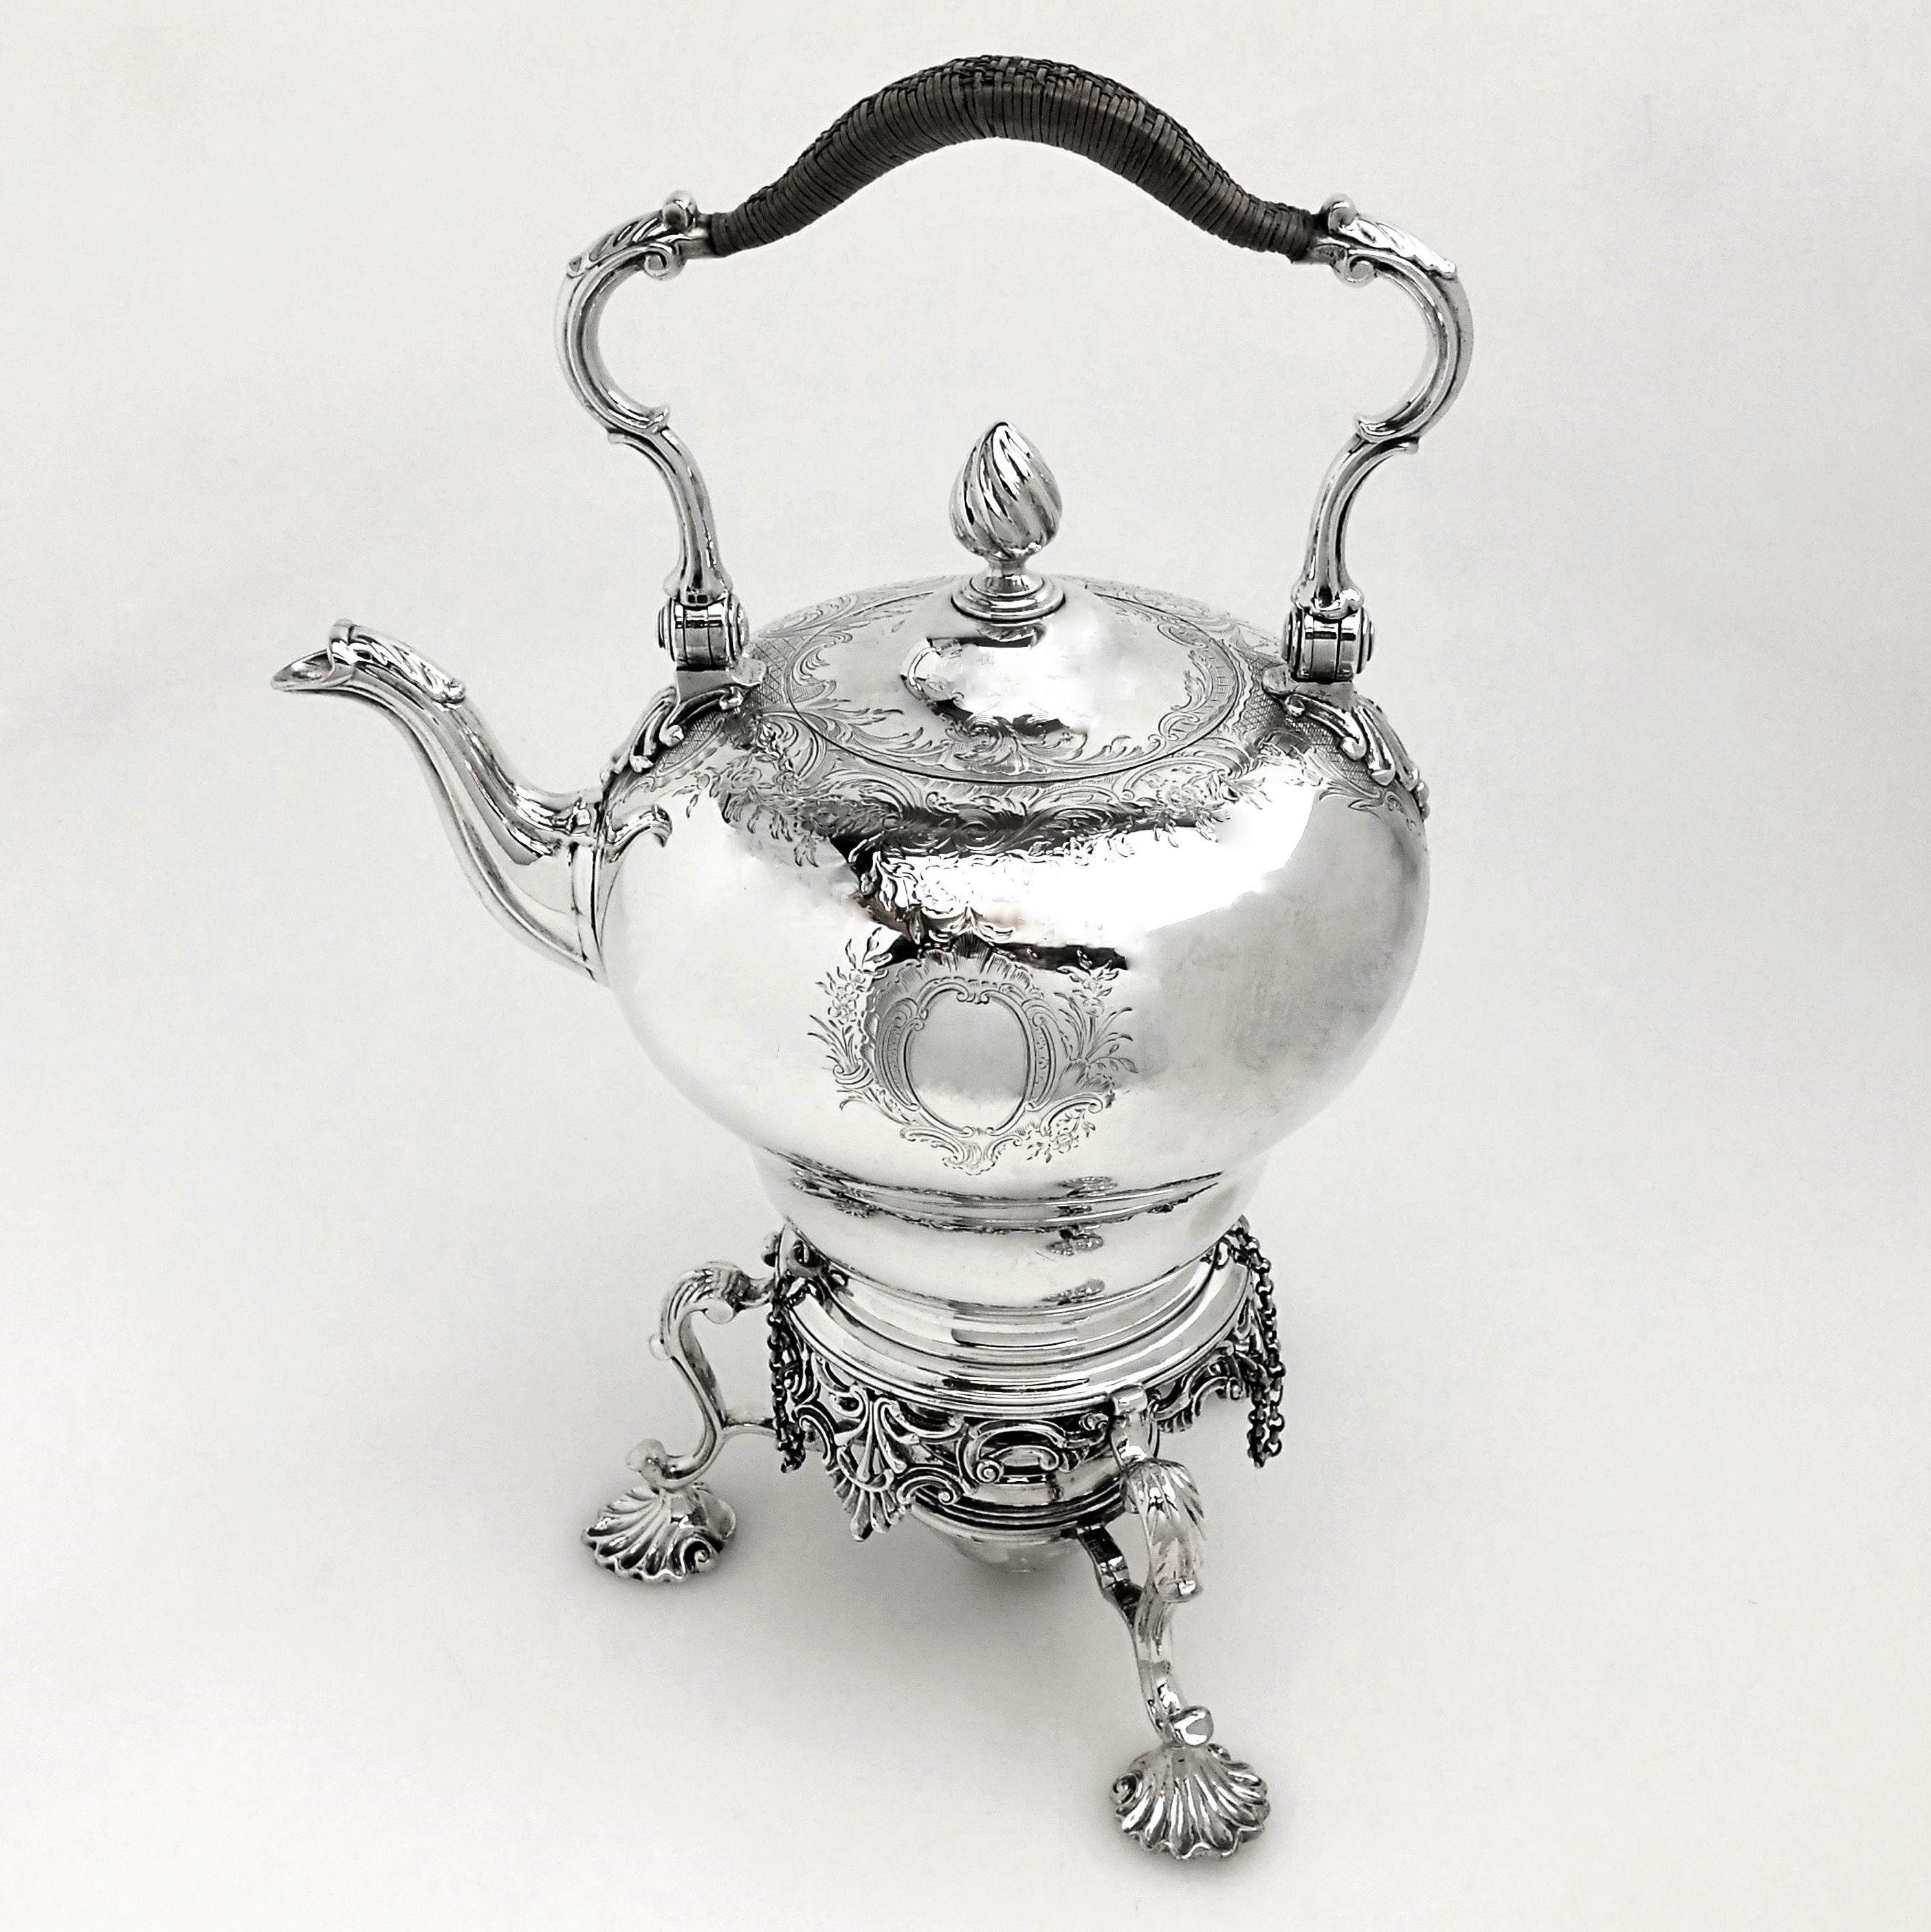 A beautiful antique Victorian sterling silver kettle on stand with a fitted burner.
 
 Made in London in 1851 by Benjamin Preston and retailed by Osborn, 2 Princes Street, Cavendish Sq.
 
 Approximate weight 69.7oz / 2168g
Measures: Approximate